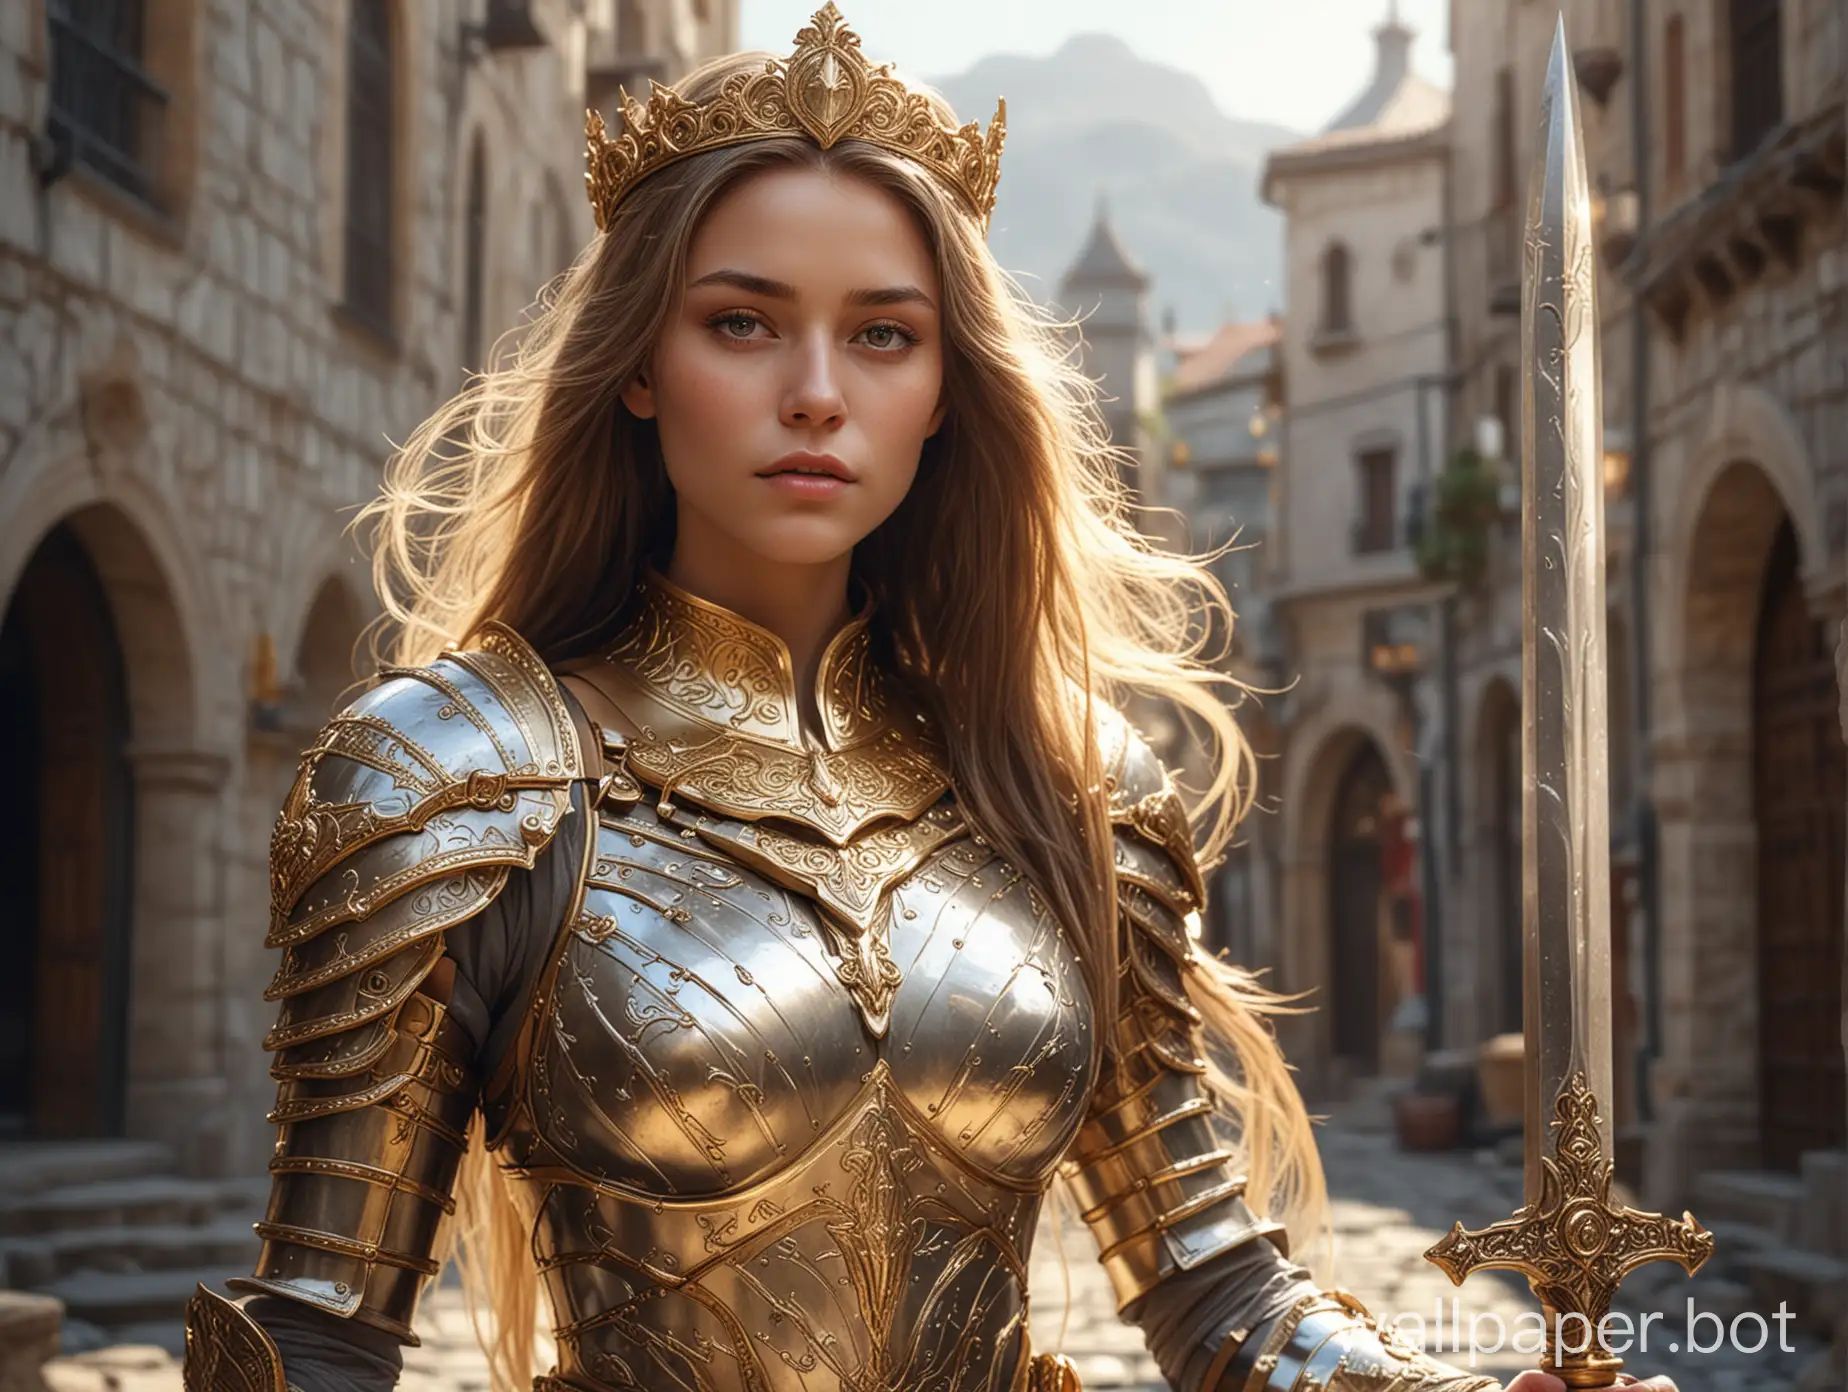 Golden-Armor-Princess-with-Sword-in-Ancient-City